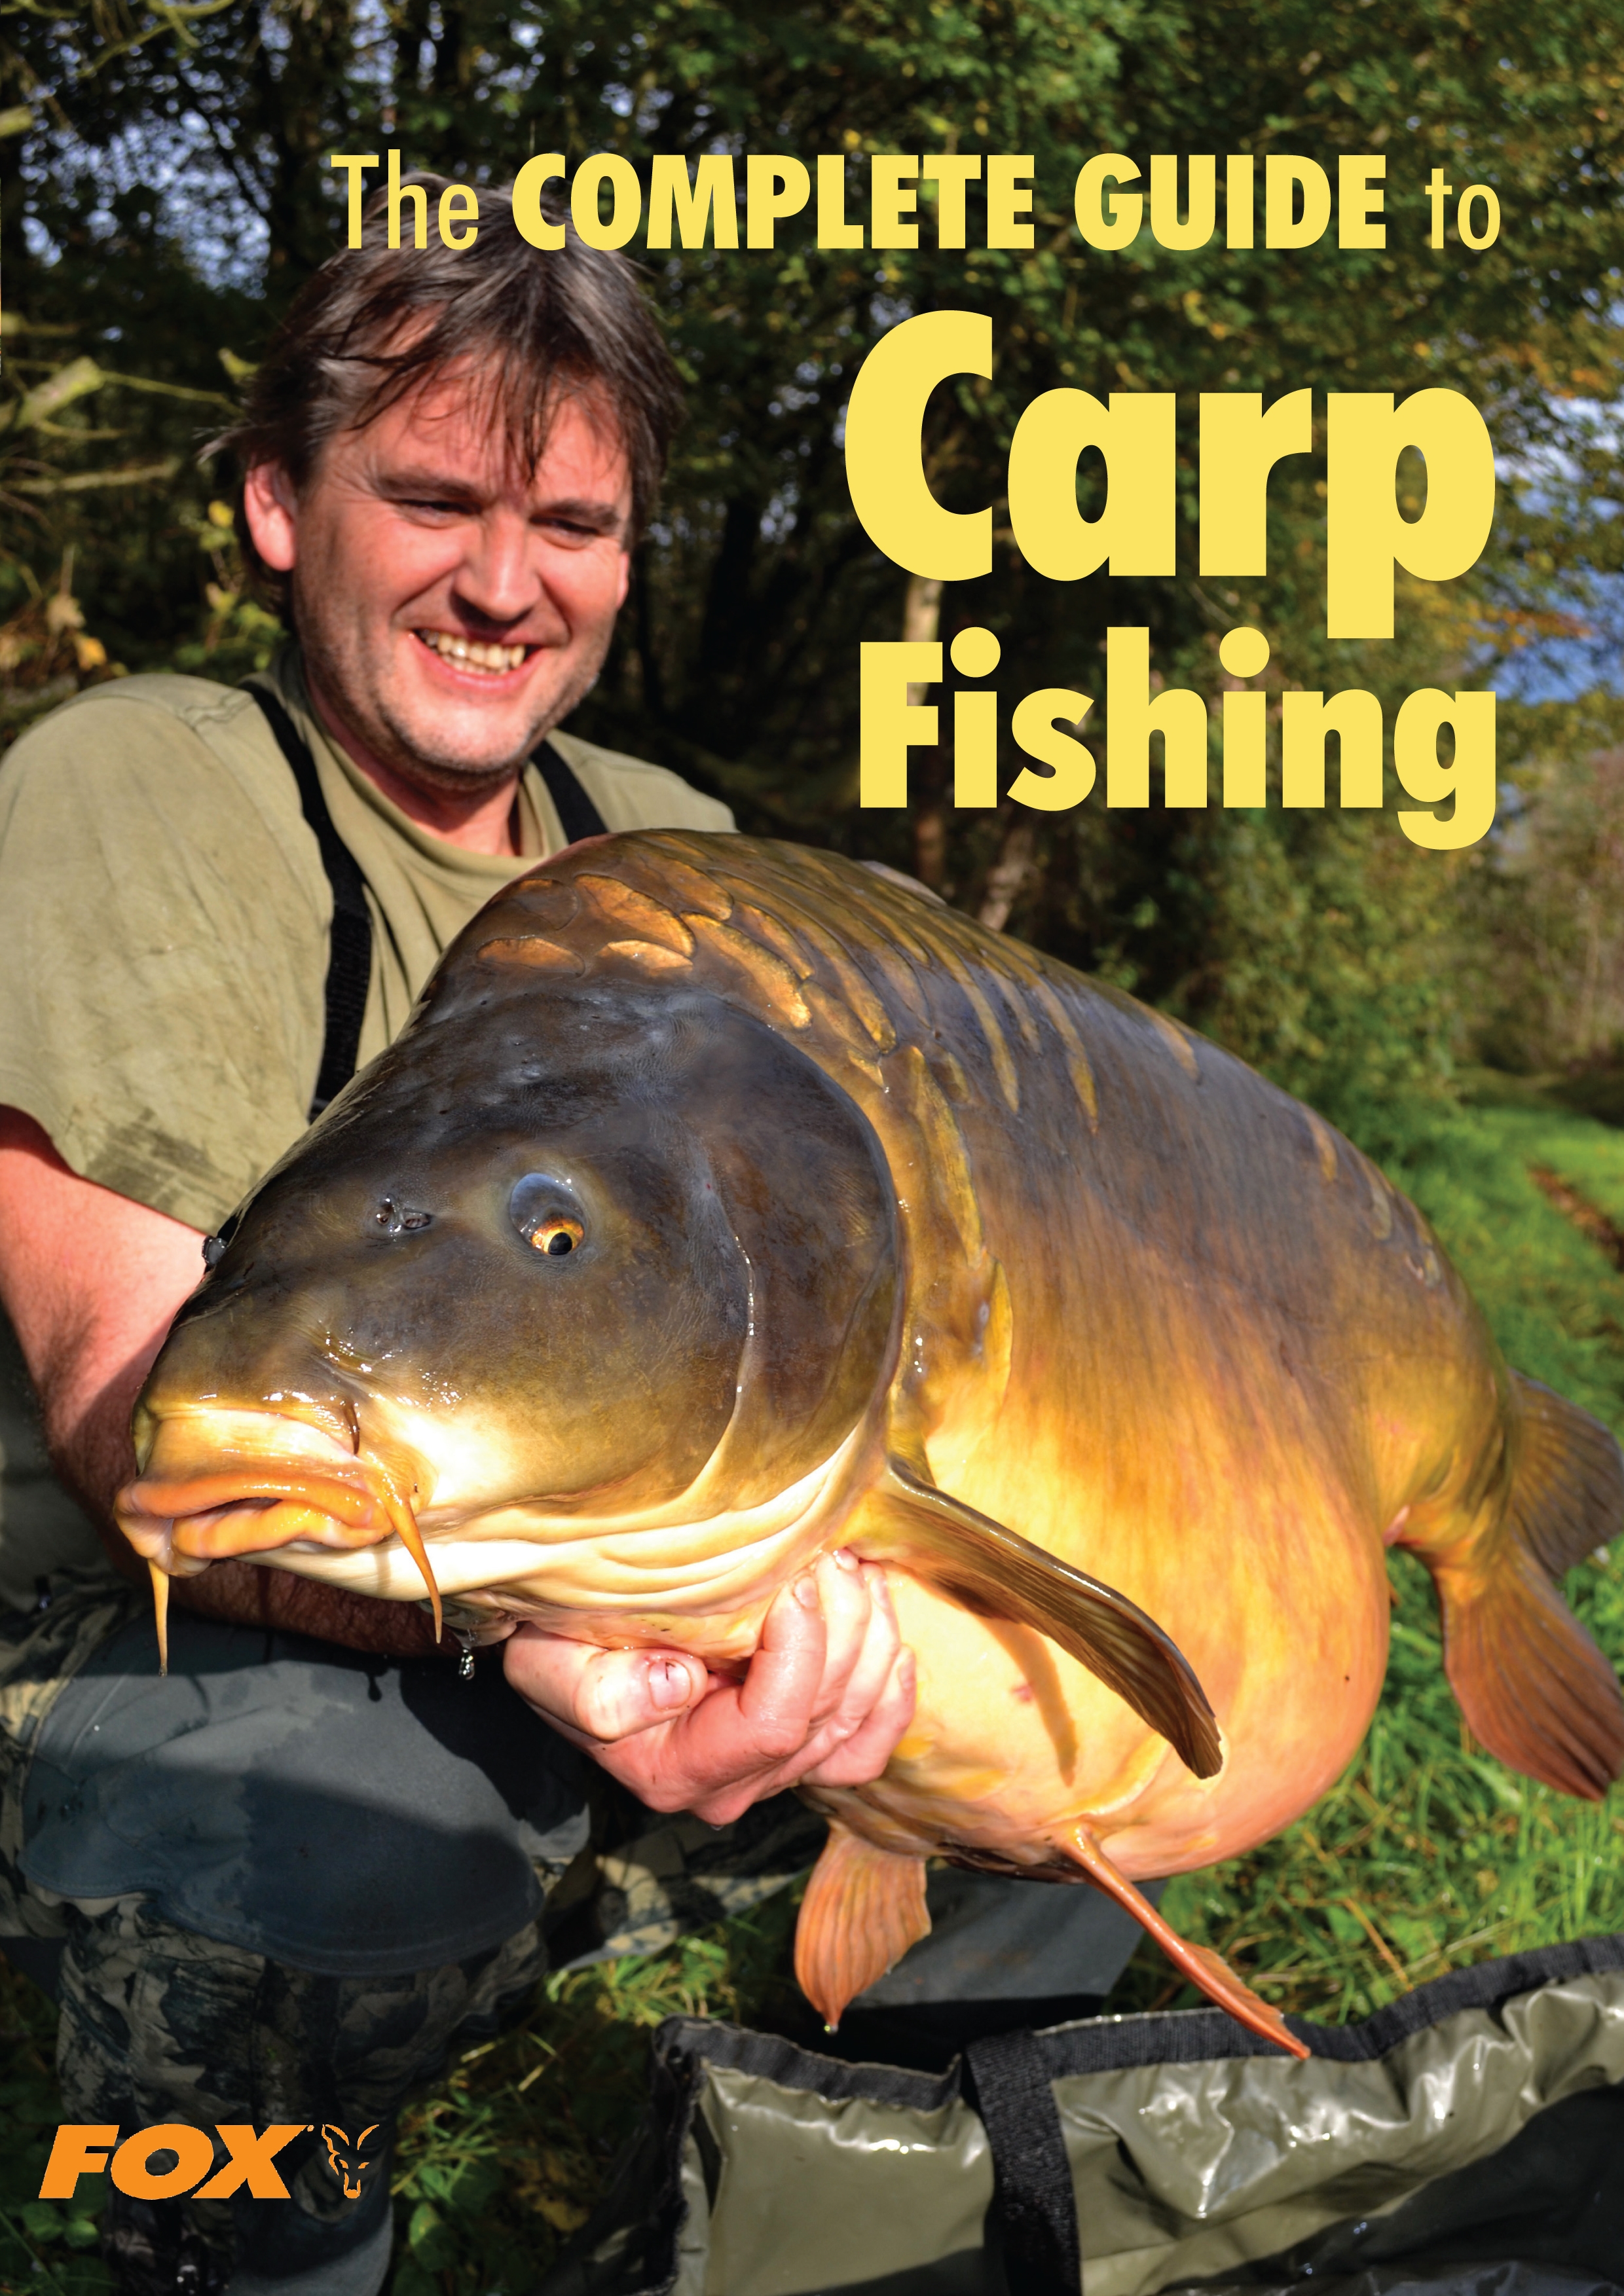 The Fox Complete Guide to Carp Fishing by Colin Davidson - Penguin